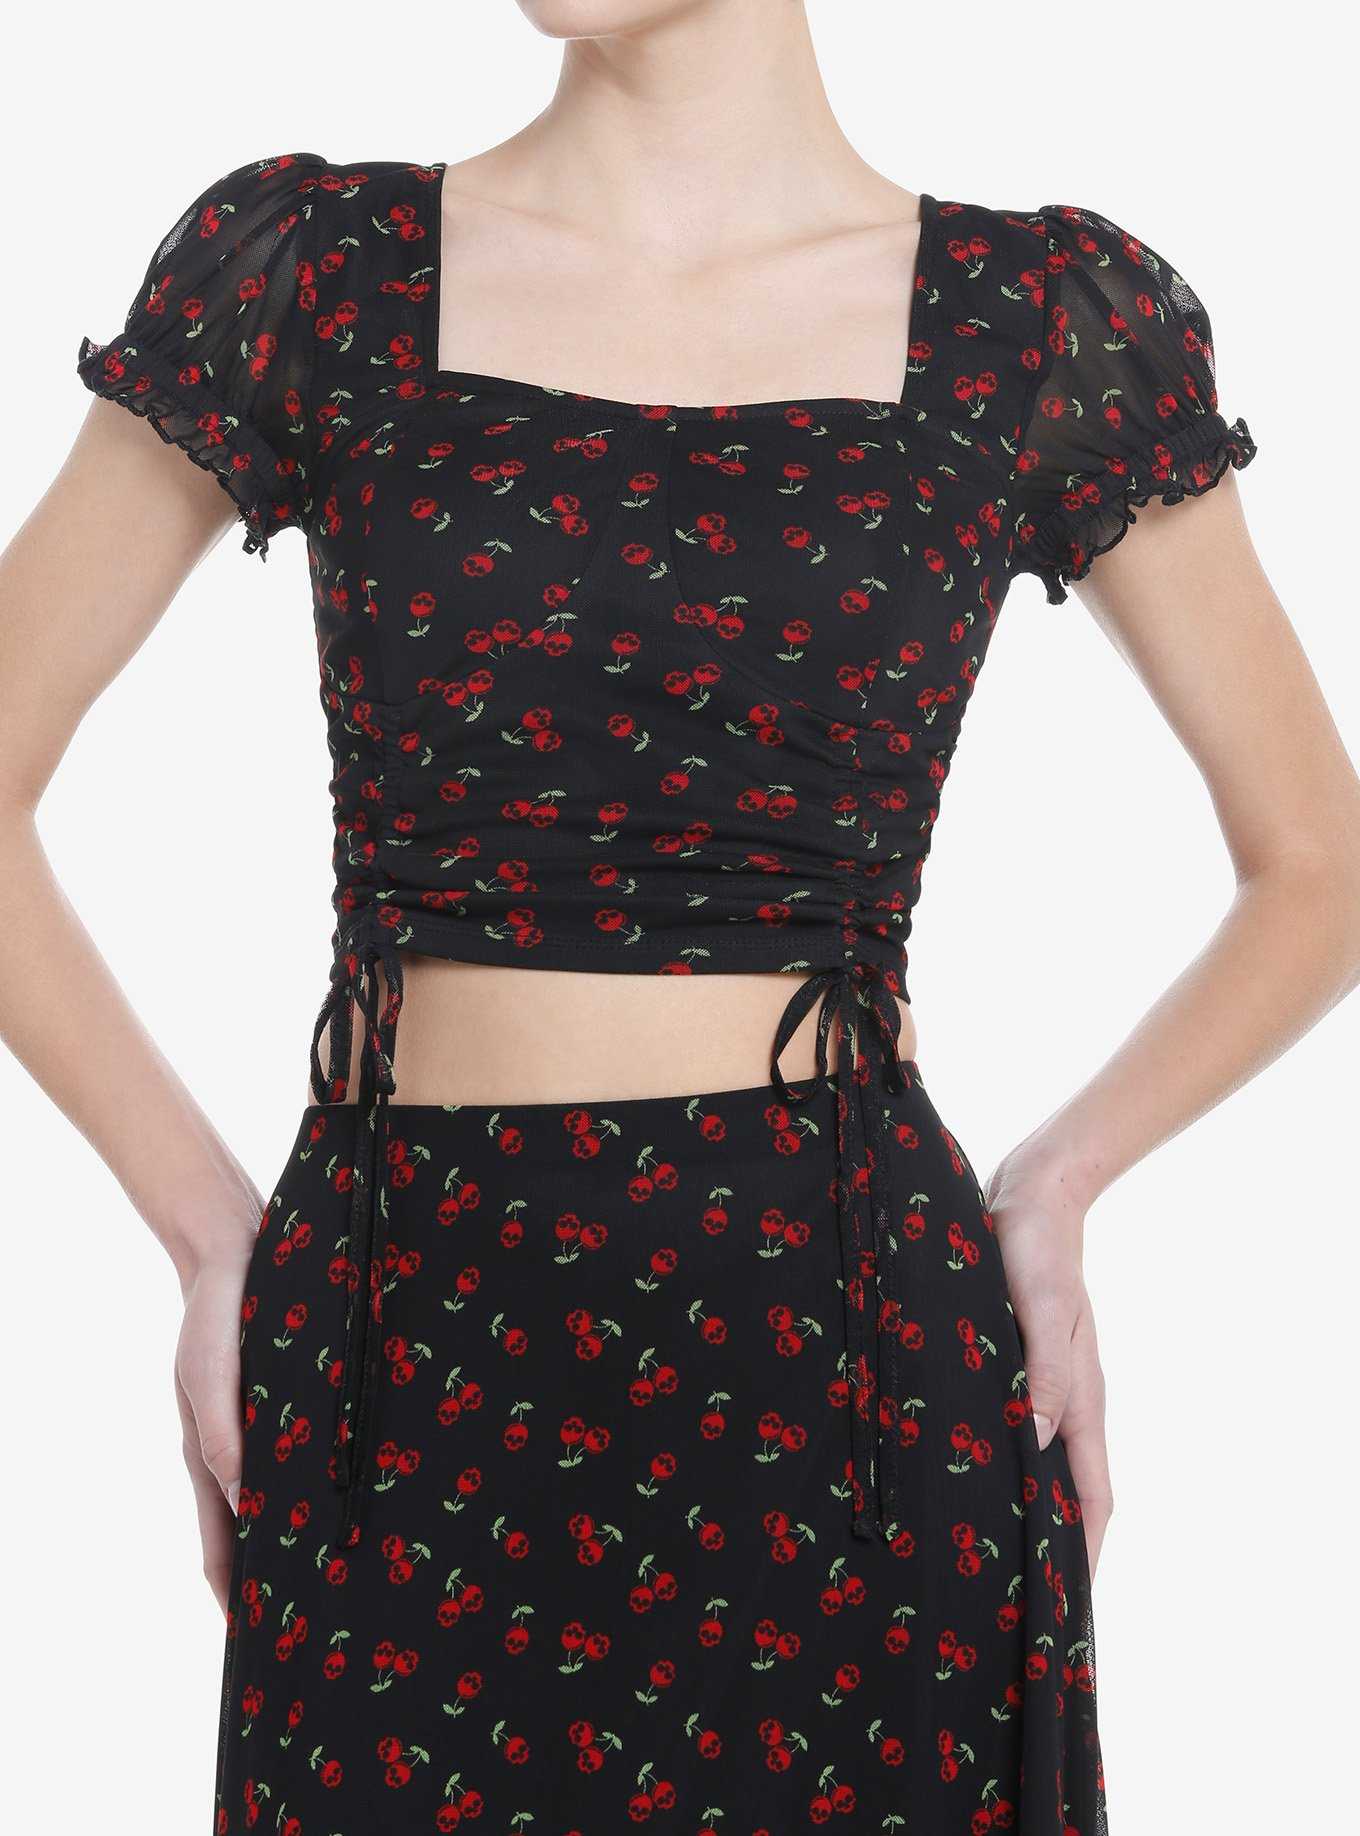 Social Collision Skull Cherry Ruched Girls Crop Top, , hi-res